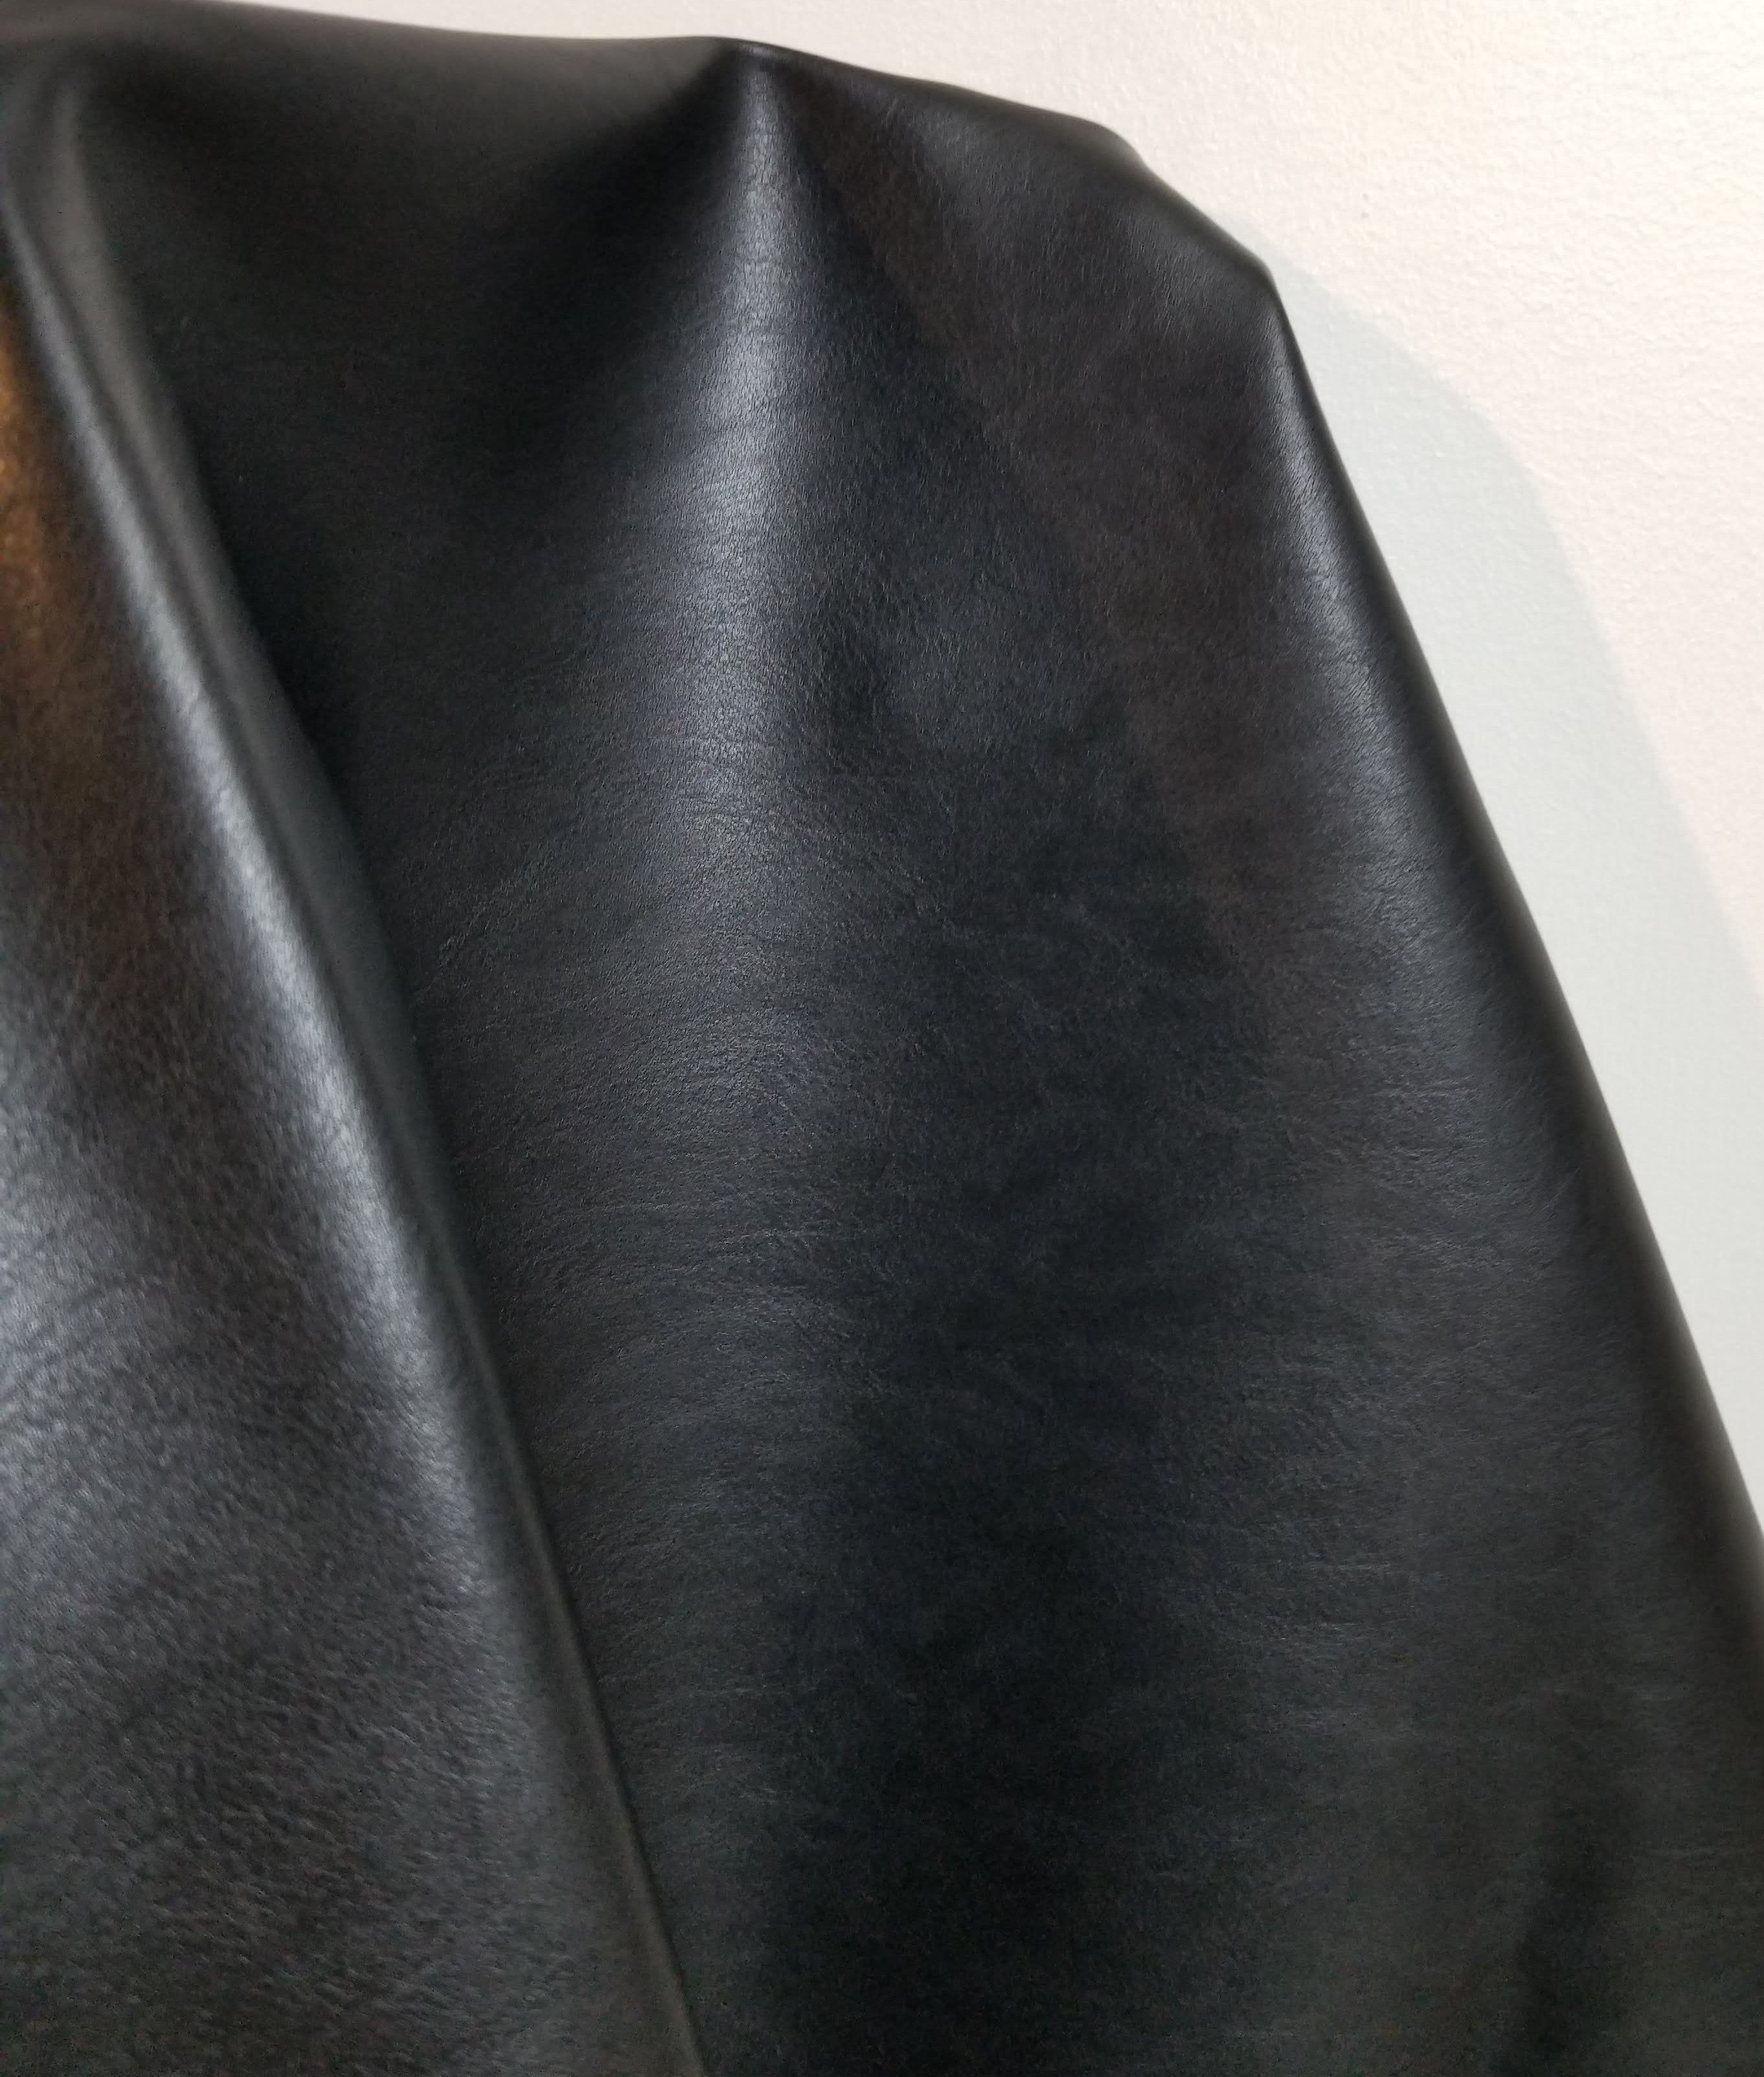  Faux vegan leather by the yard sheets distressed leather fabric for upholstery 30,000 Double Rubs vinyl sheets nappa leather crafts bookbinding books furniture fabrics uphilstery fuax material pu pleather faiux learher cruelty free nappa seat black smooth